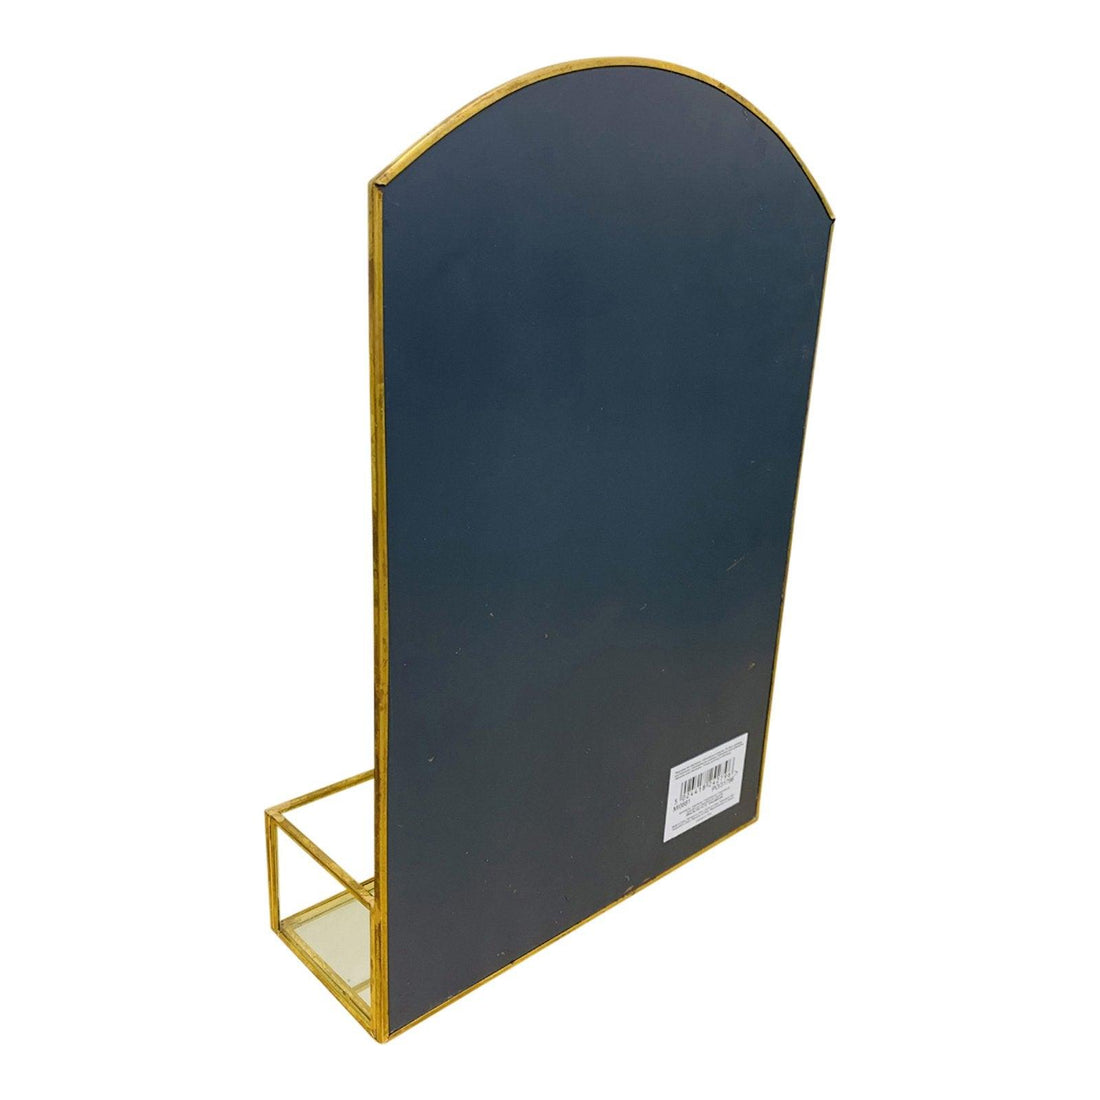 Gold Metal Table Mirror - £24.99 - Mirrors 